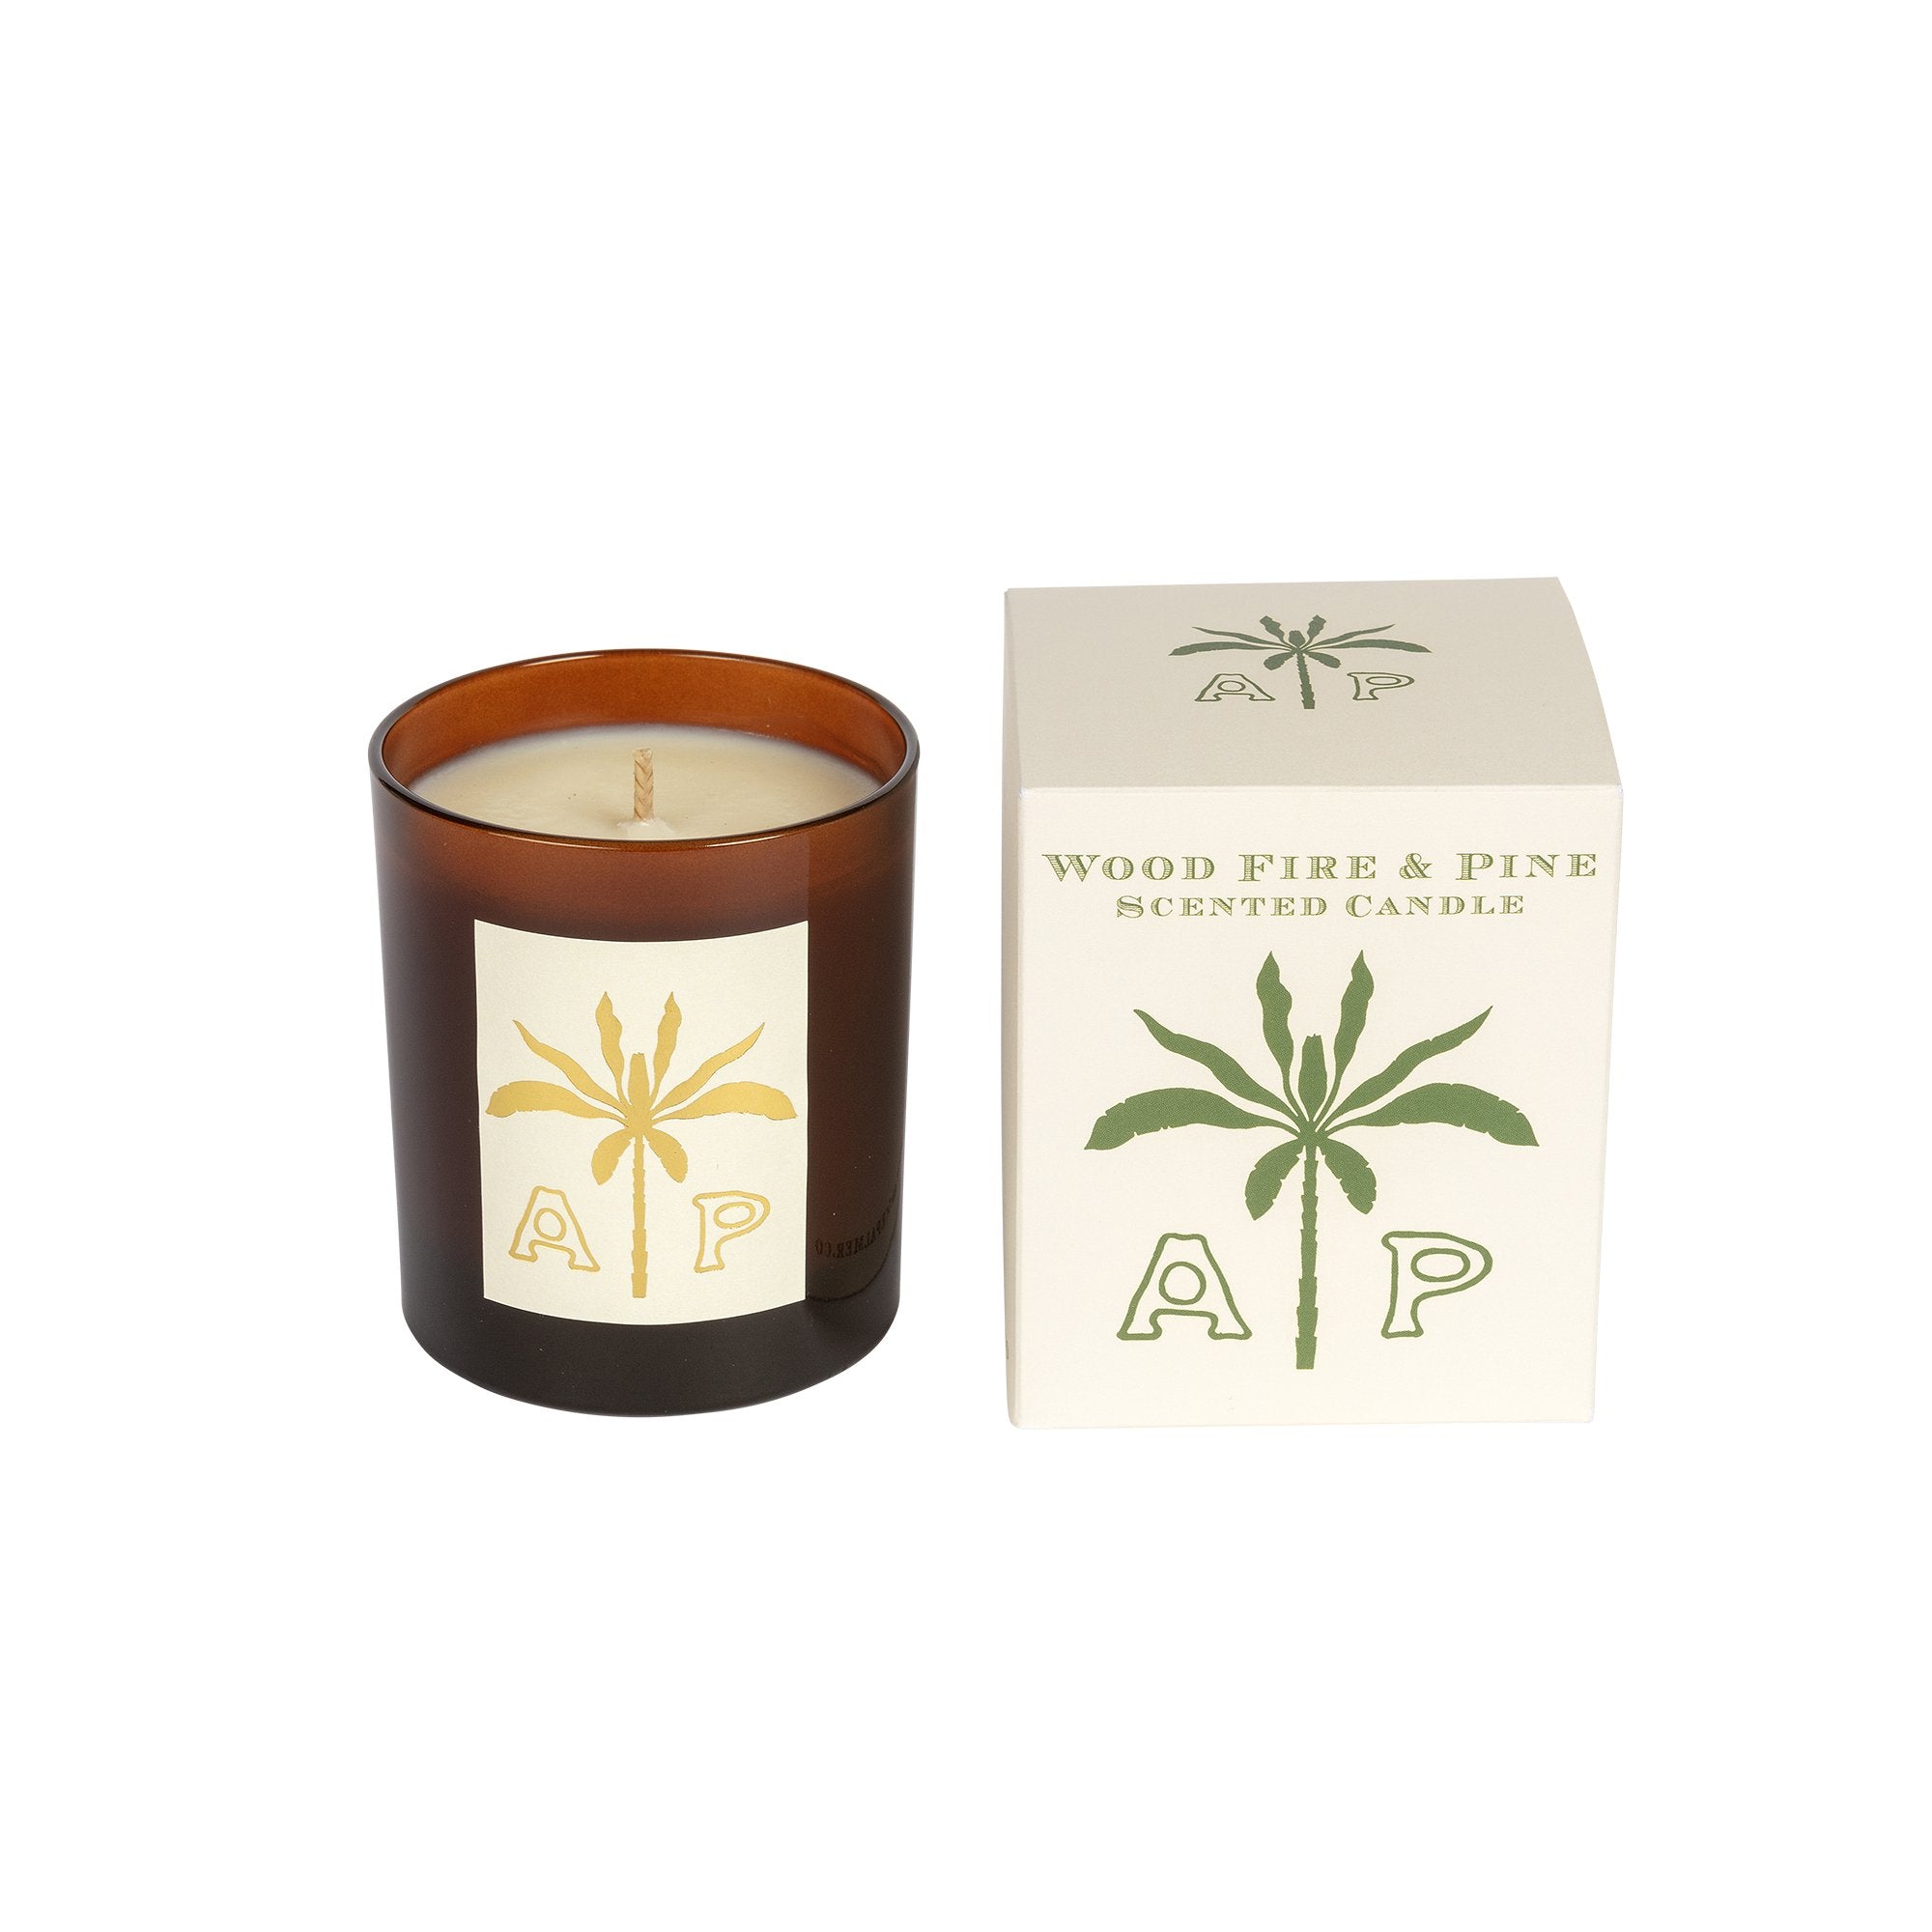 Wood Fire & Pine Candle - Alice Palmer & Co